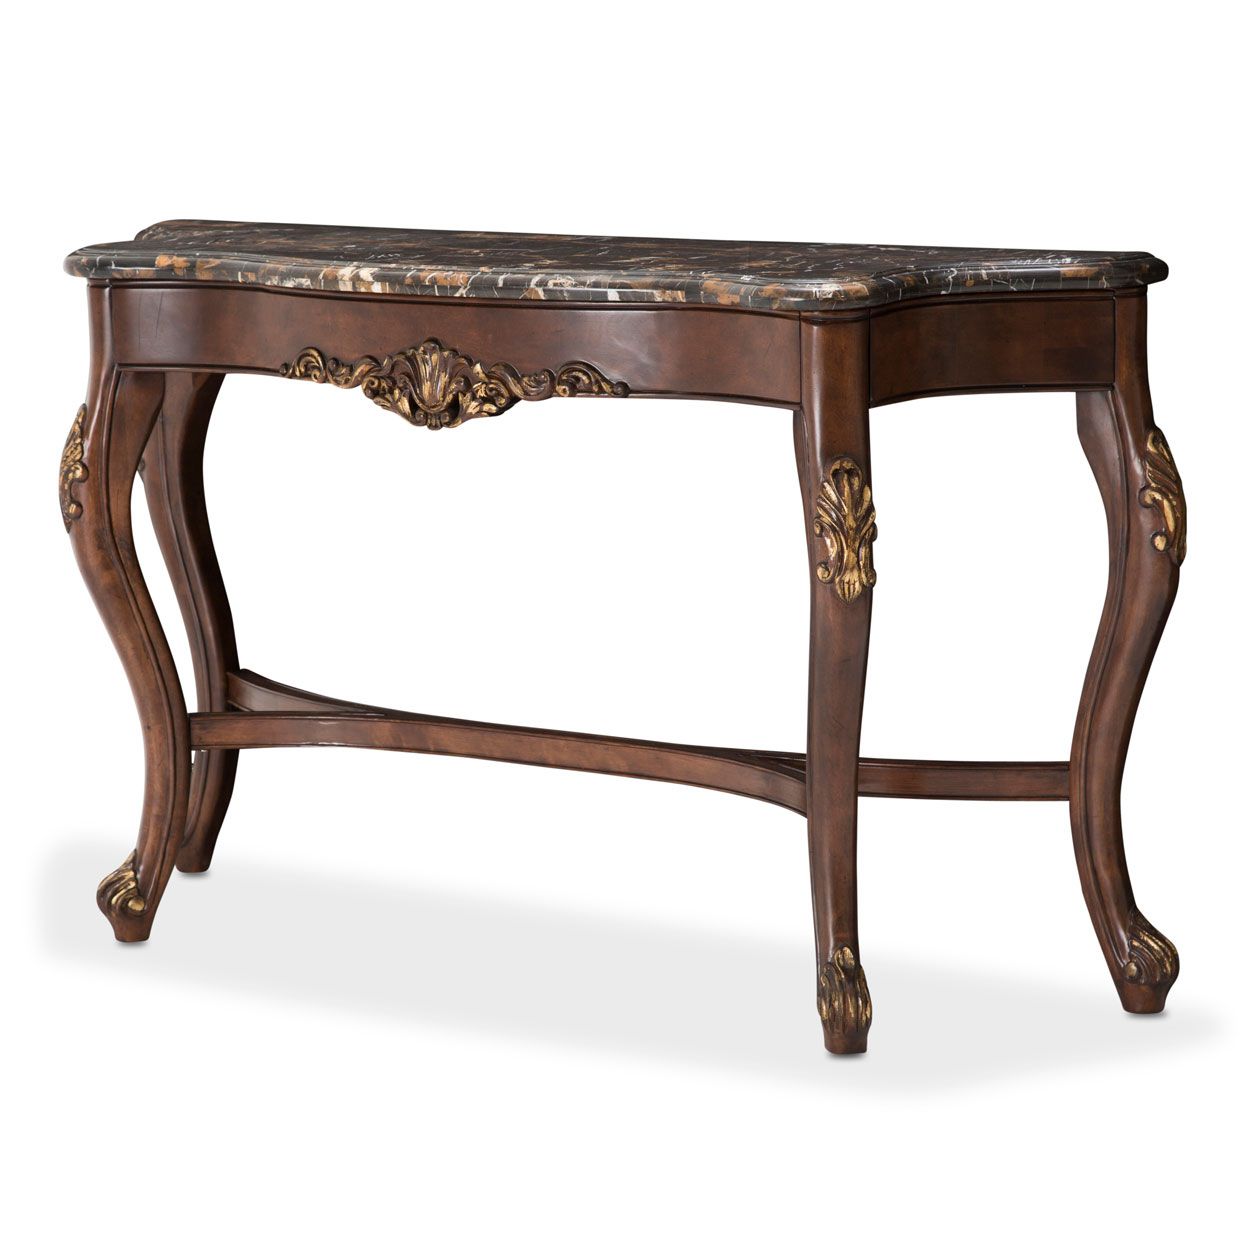 Villa Di Como Traditional Carved Marble Top Sofa Table In Portobello Finish Pertaining To Marble Top Console Tables (View 13 of 20)